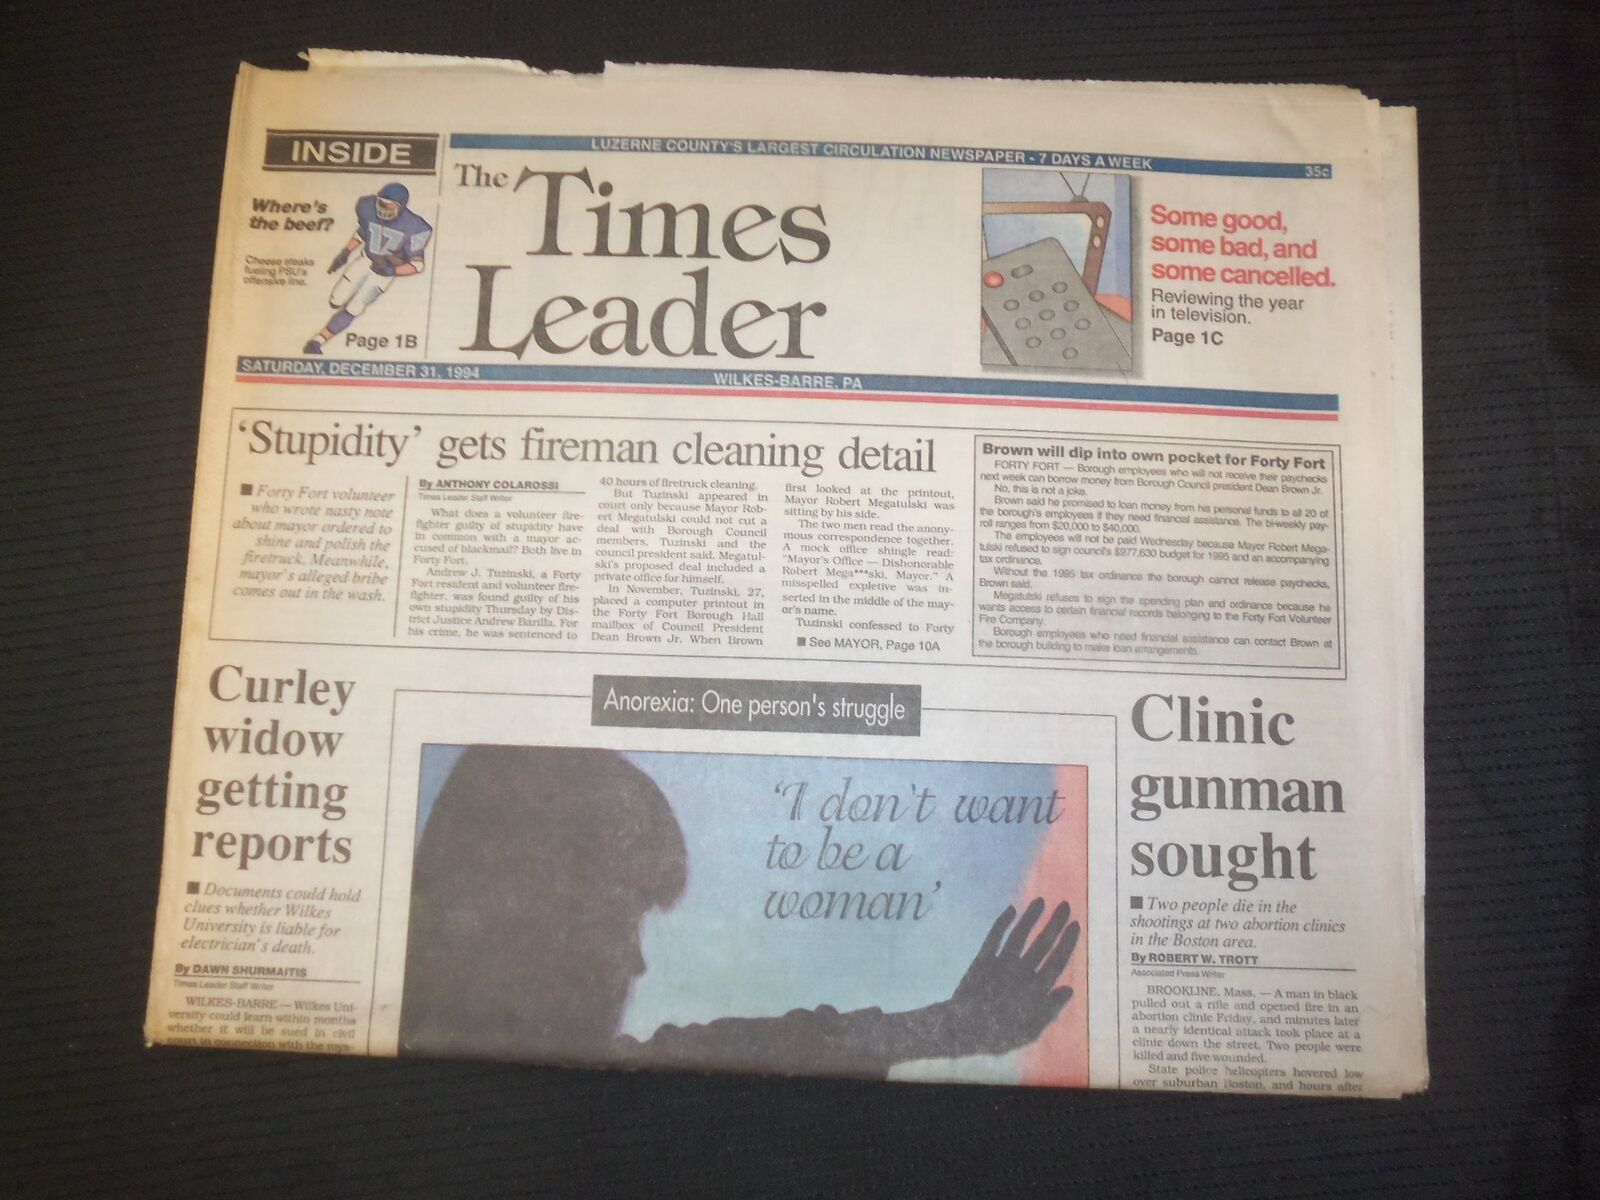 1994 DECEMBER 31 WILKES-BARRE TIMES LEADER - CLINIC GUNMAN SOUGHT - NP 7570